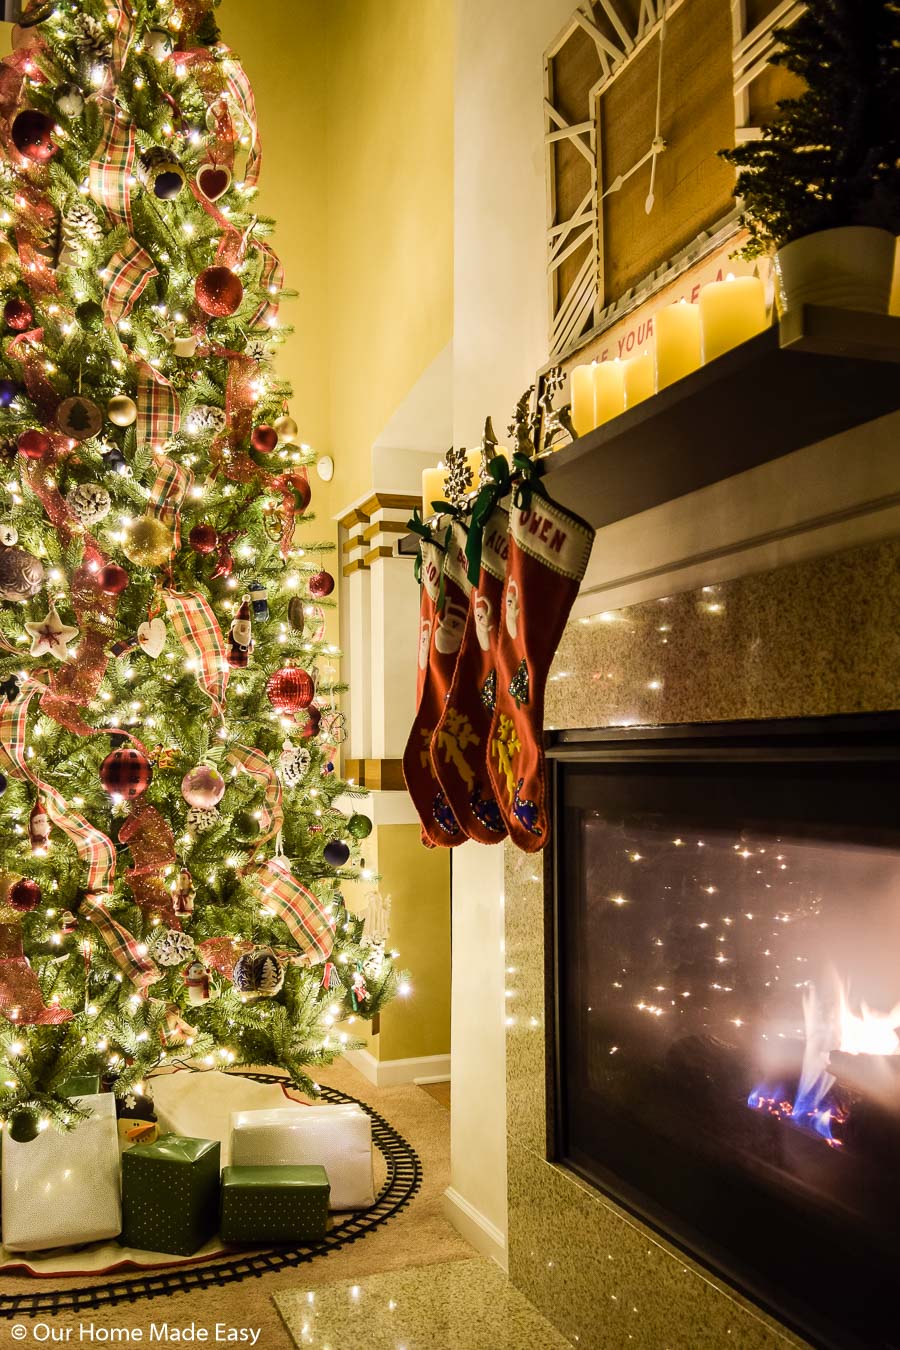 Our simple fireplace mantle is easily decorated for Christmas with our family's Christmas stockings and a few candles